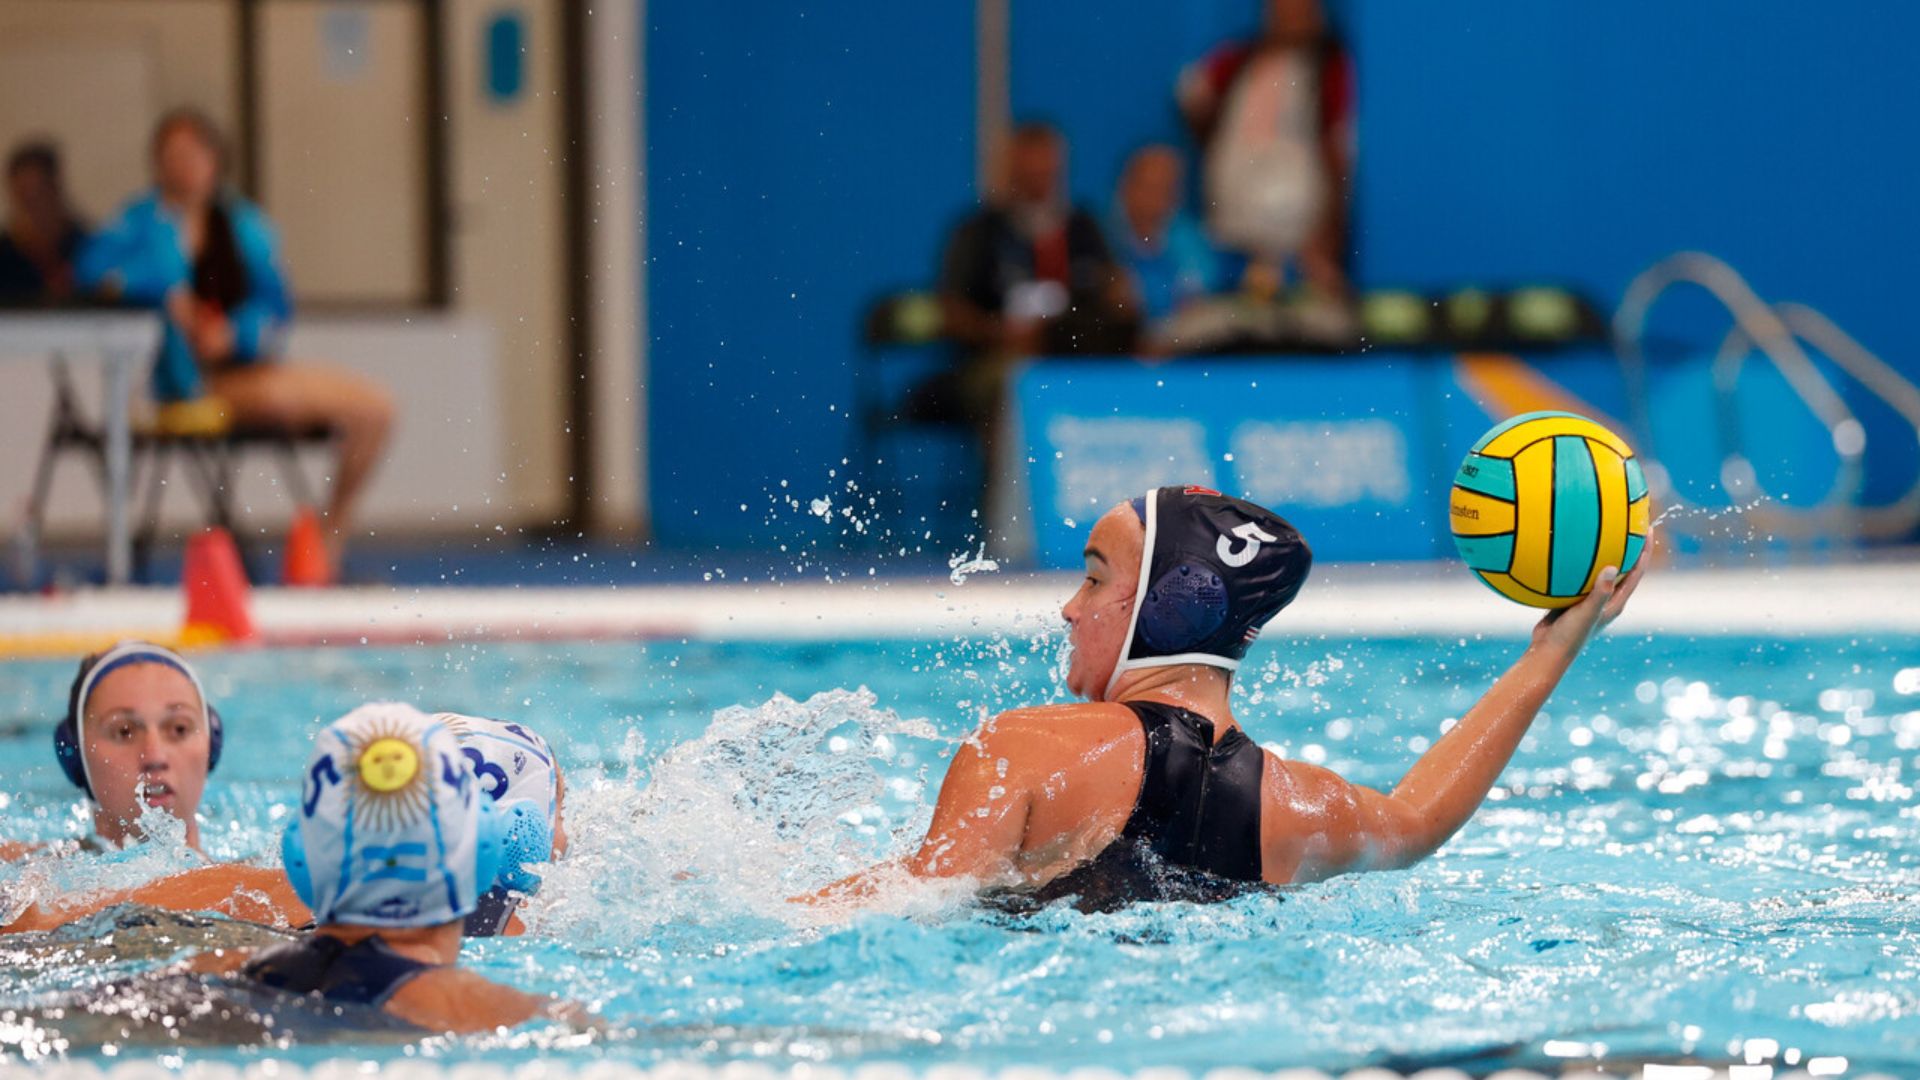 Female's Water Polo: United States and Canada Competing for Gold